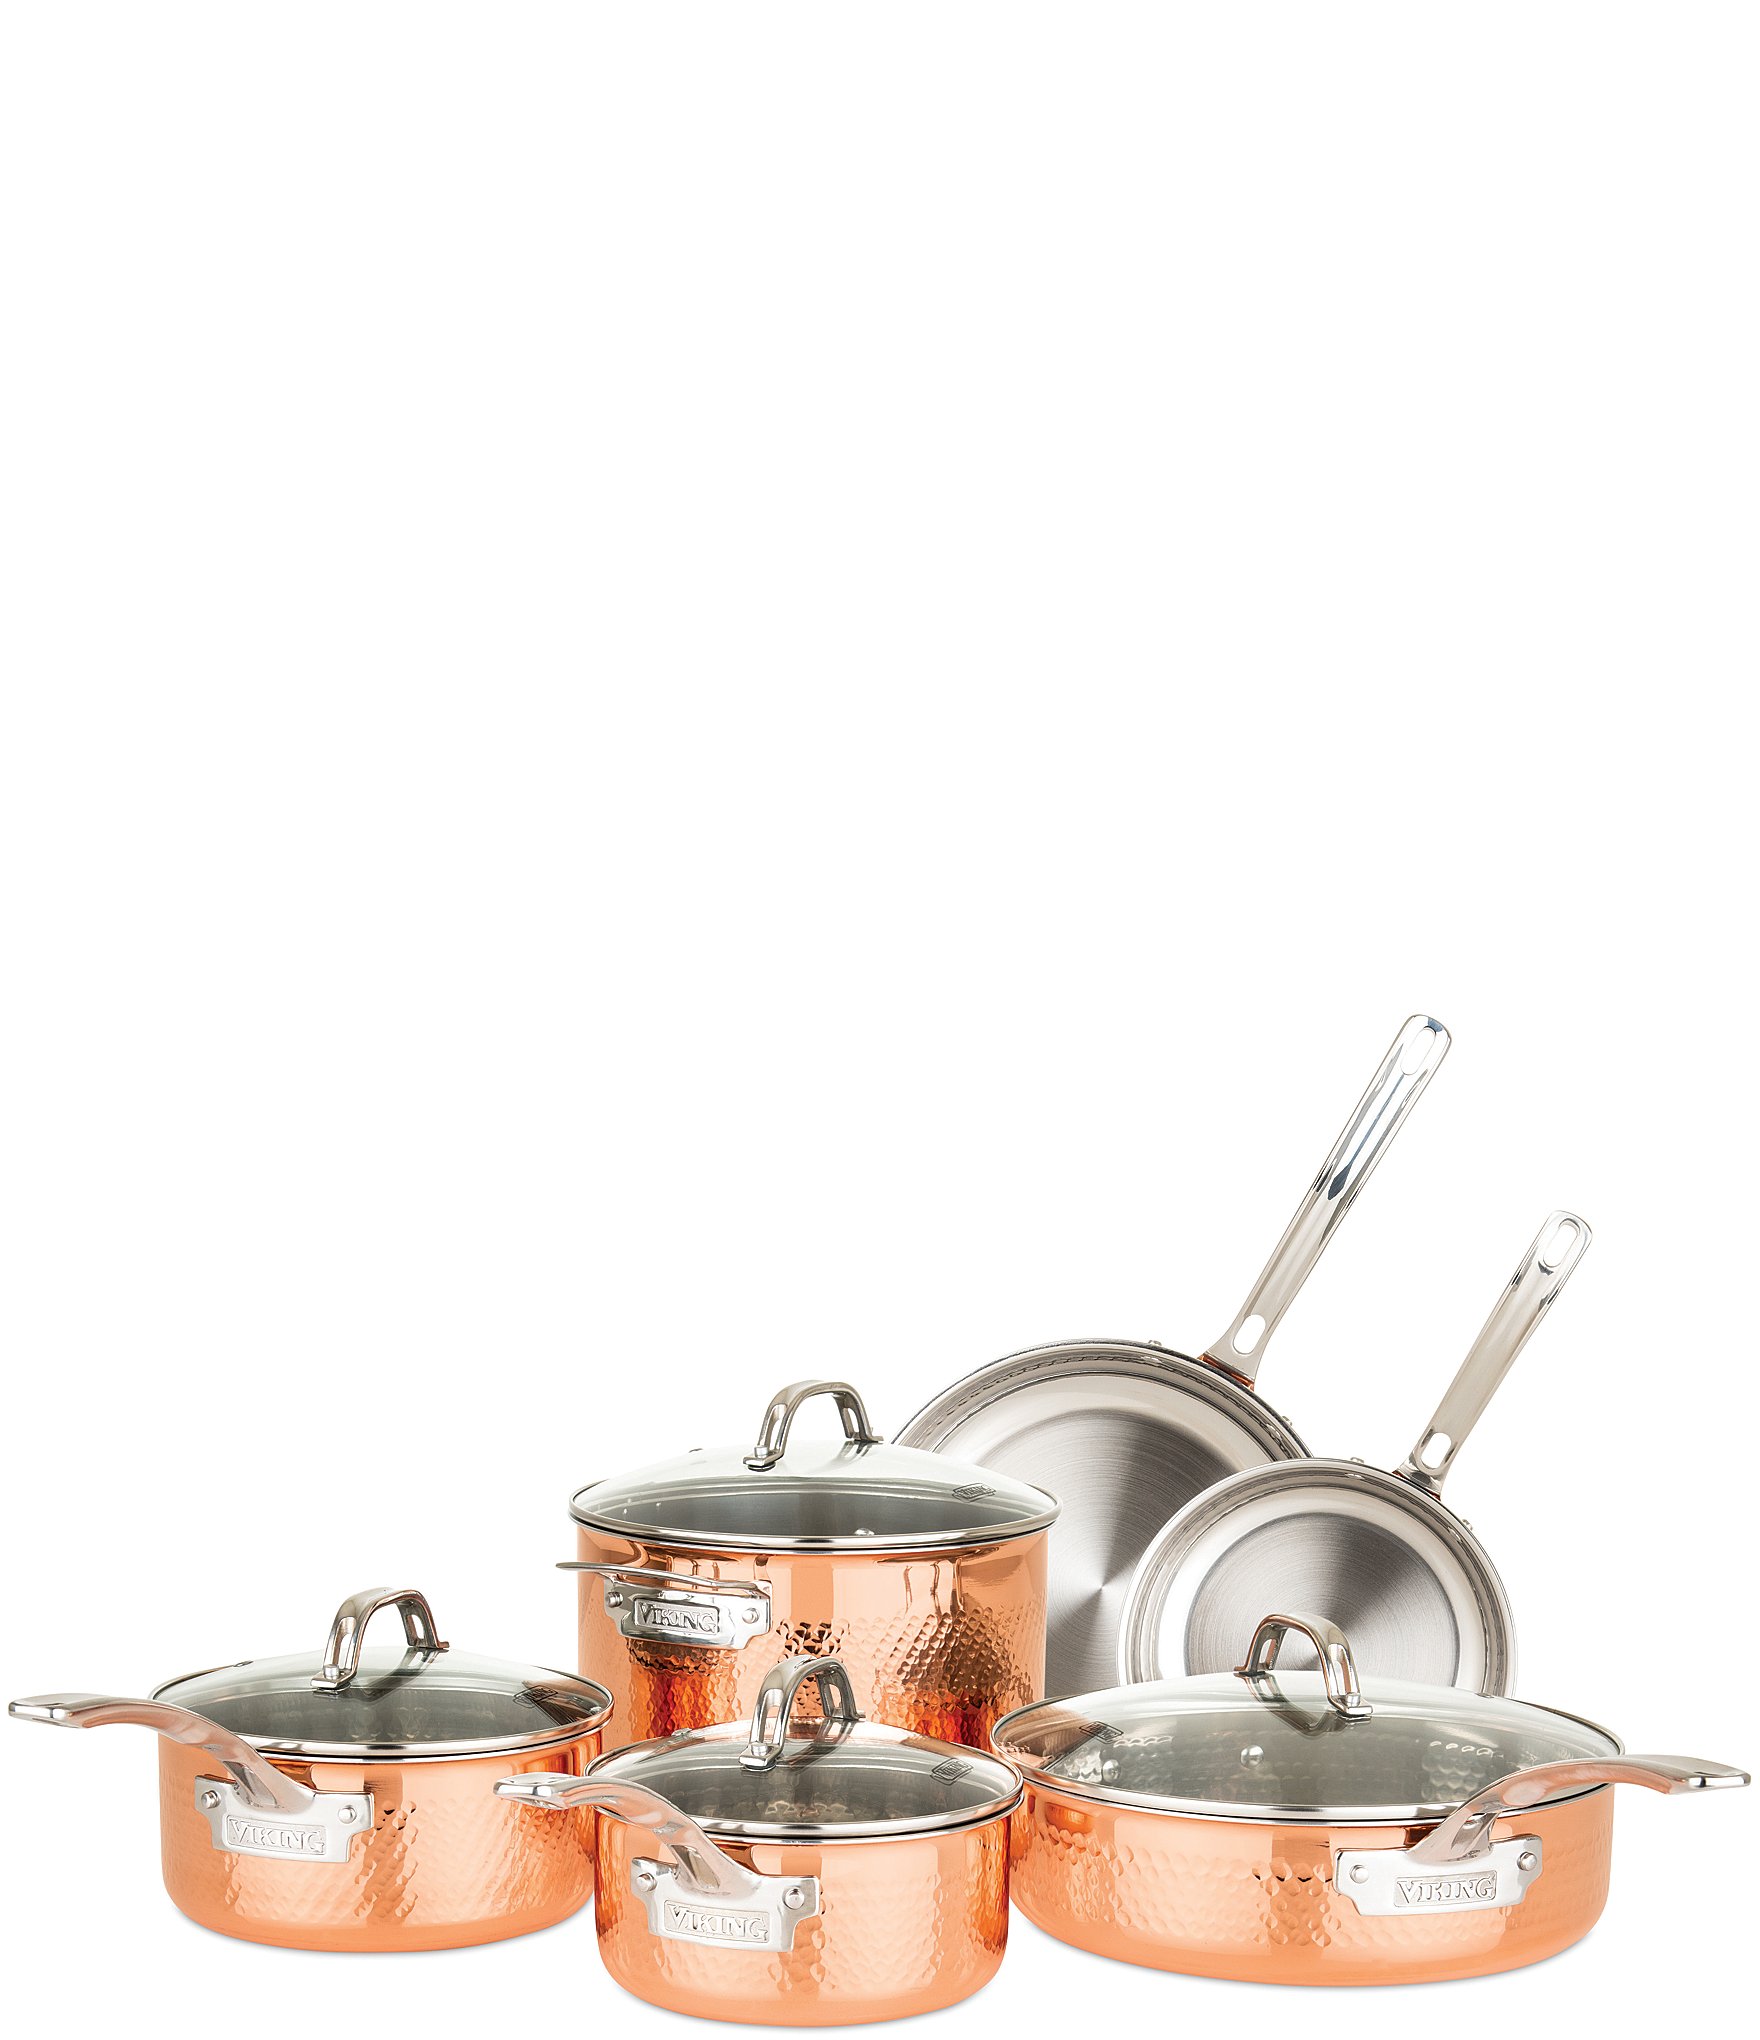 https://dimg.dillards.com/is/image/DillardsZoom/zoom/viking-3-ply-stainless-steel-copper-clad-hammered-10-piece-cookware-set/20026742_zi.jpg